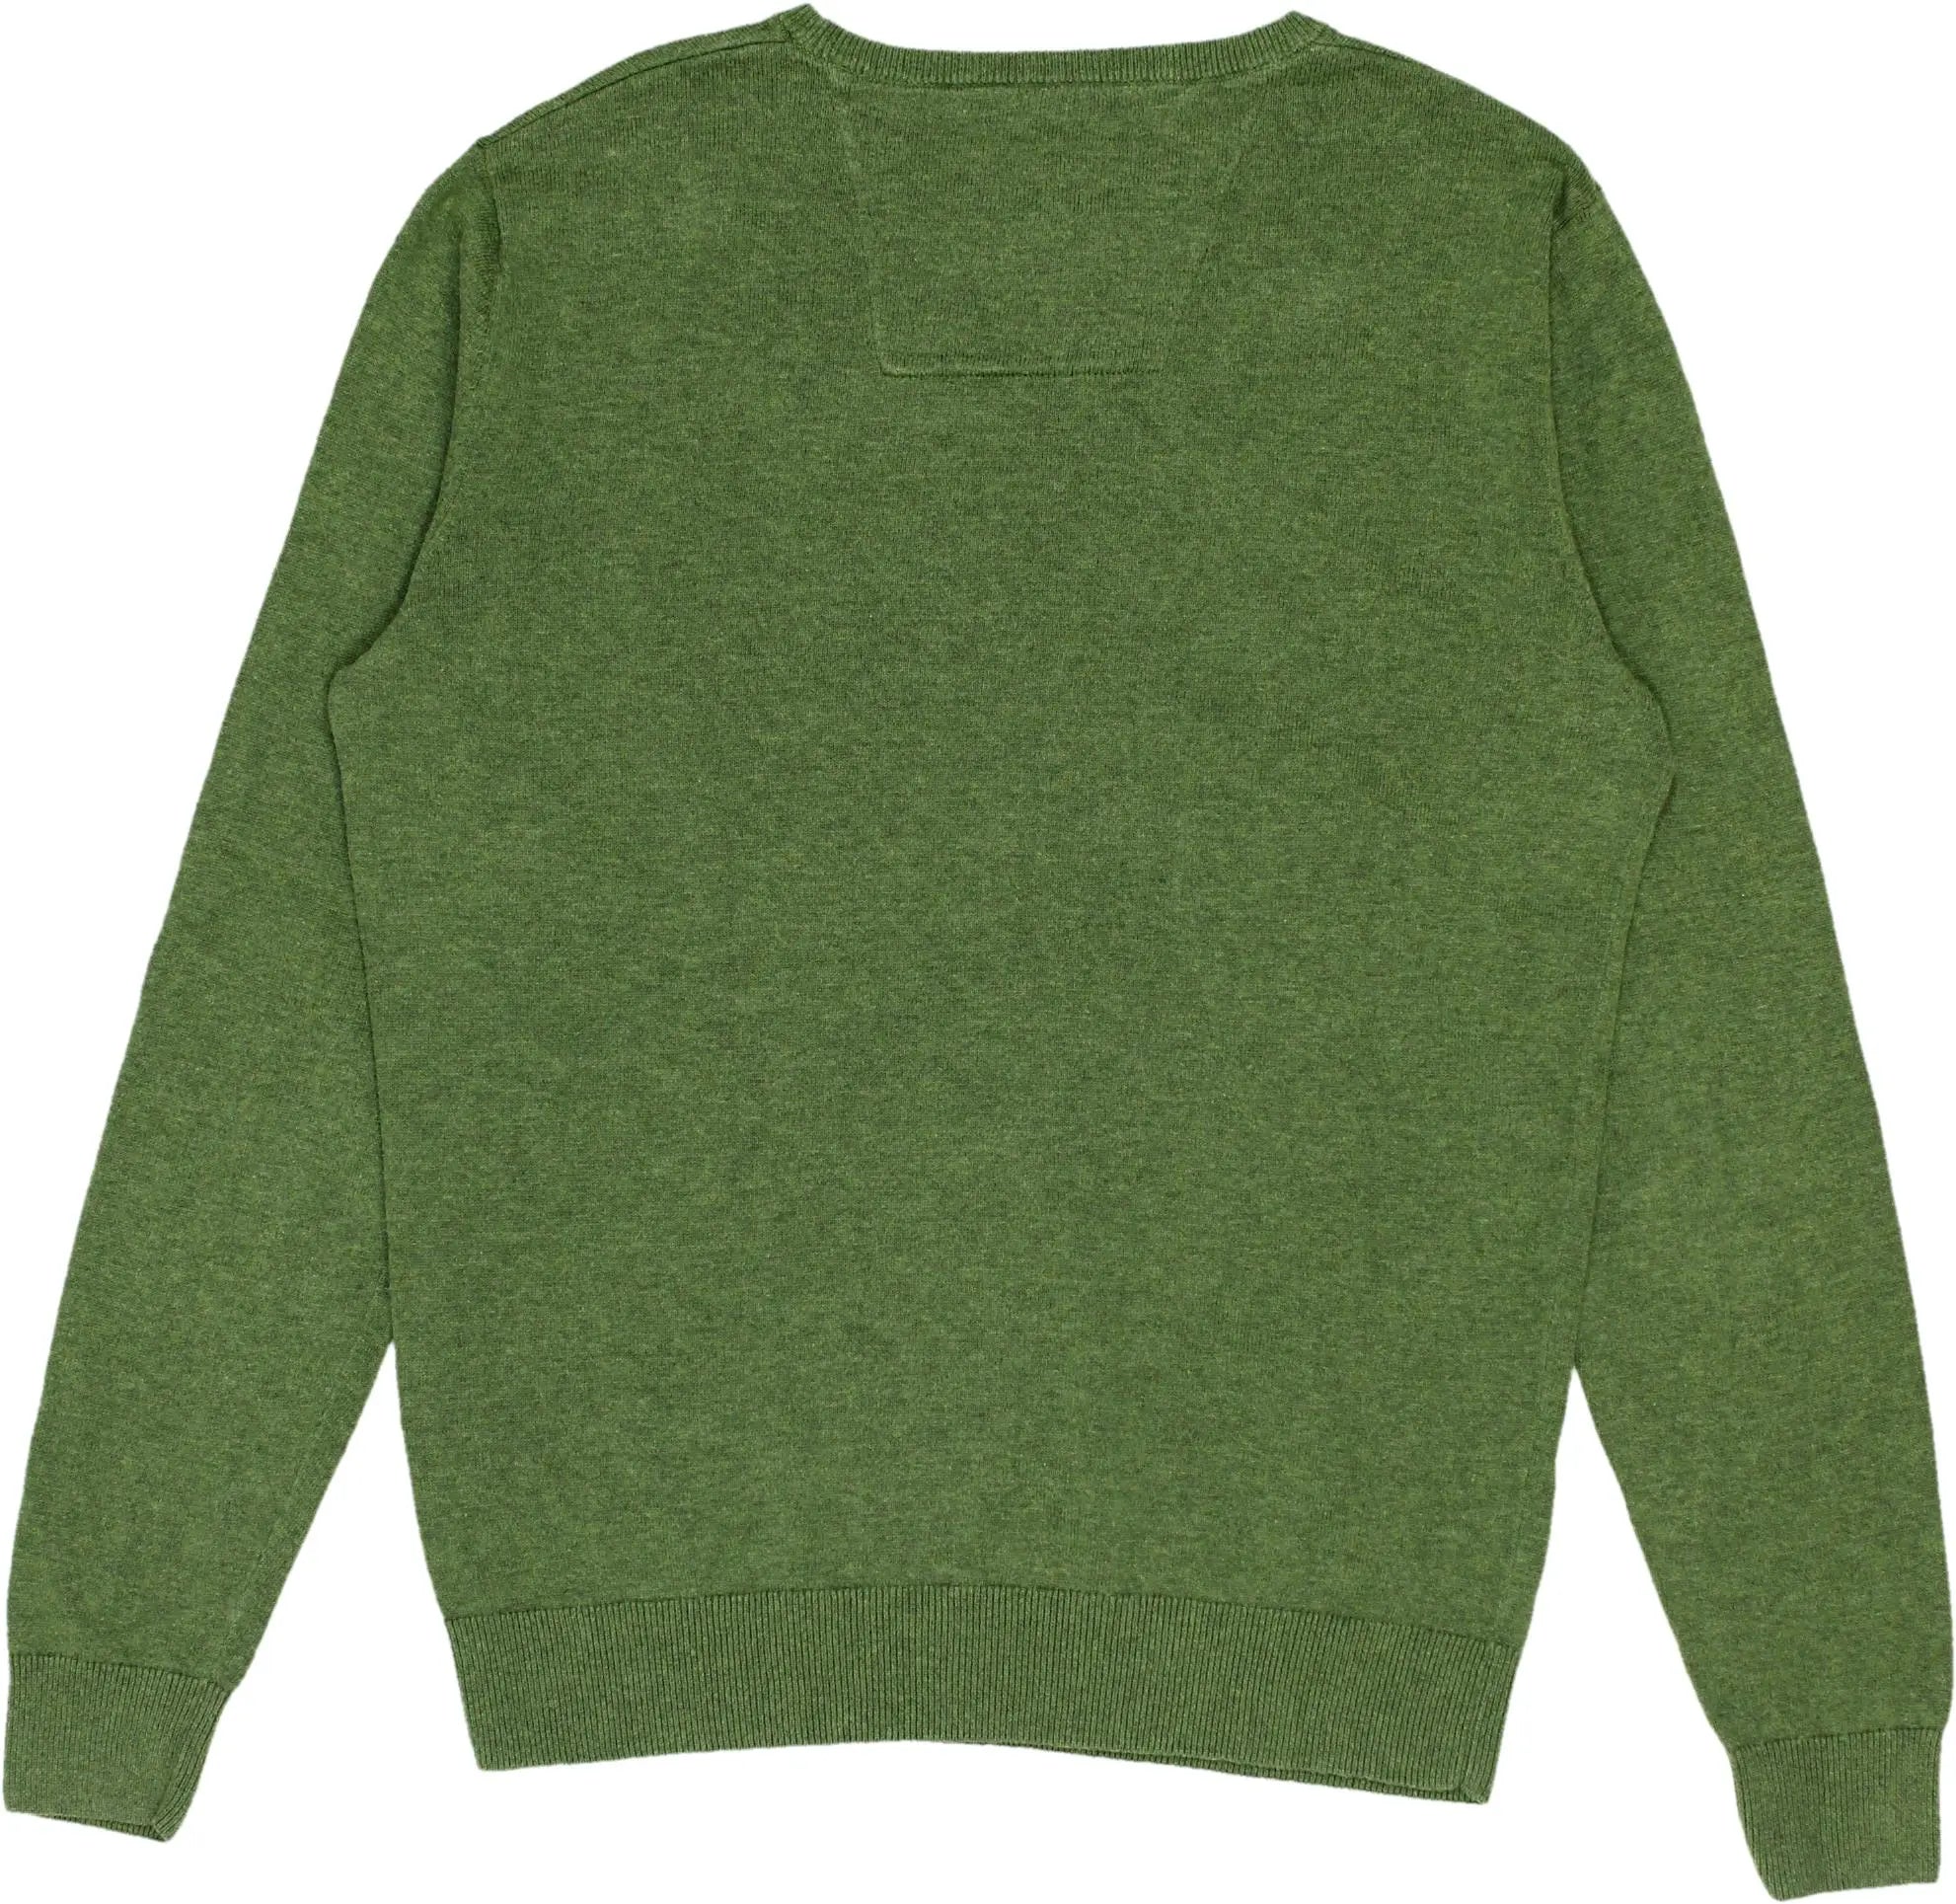 Tom Tailor - Green knitted Sweater- ThriftTale.com - Vintage and second handclothing